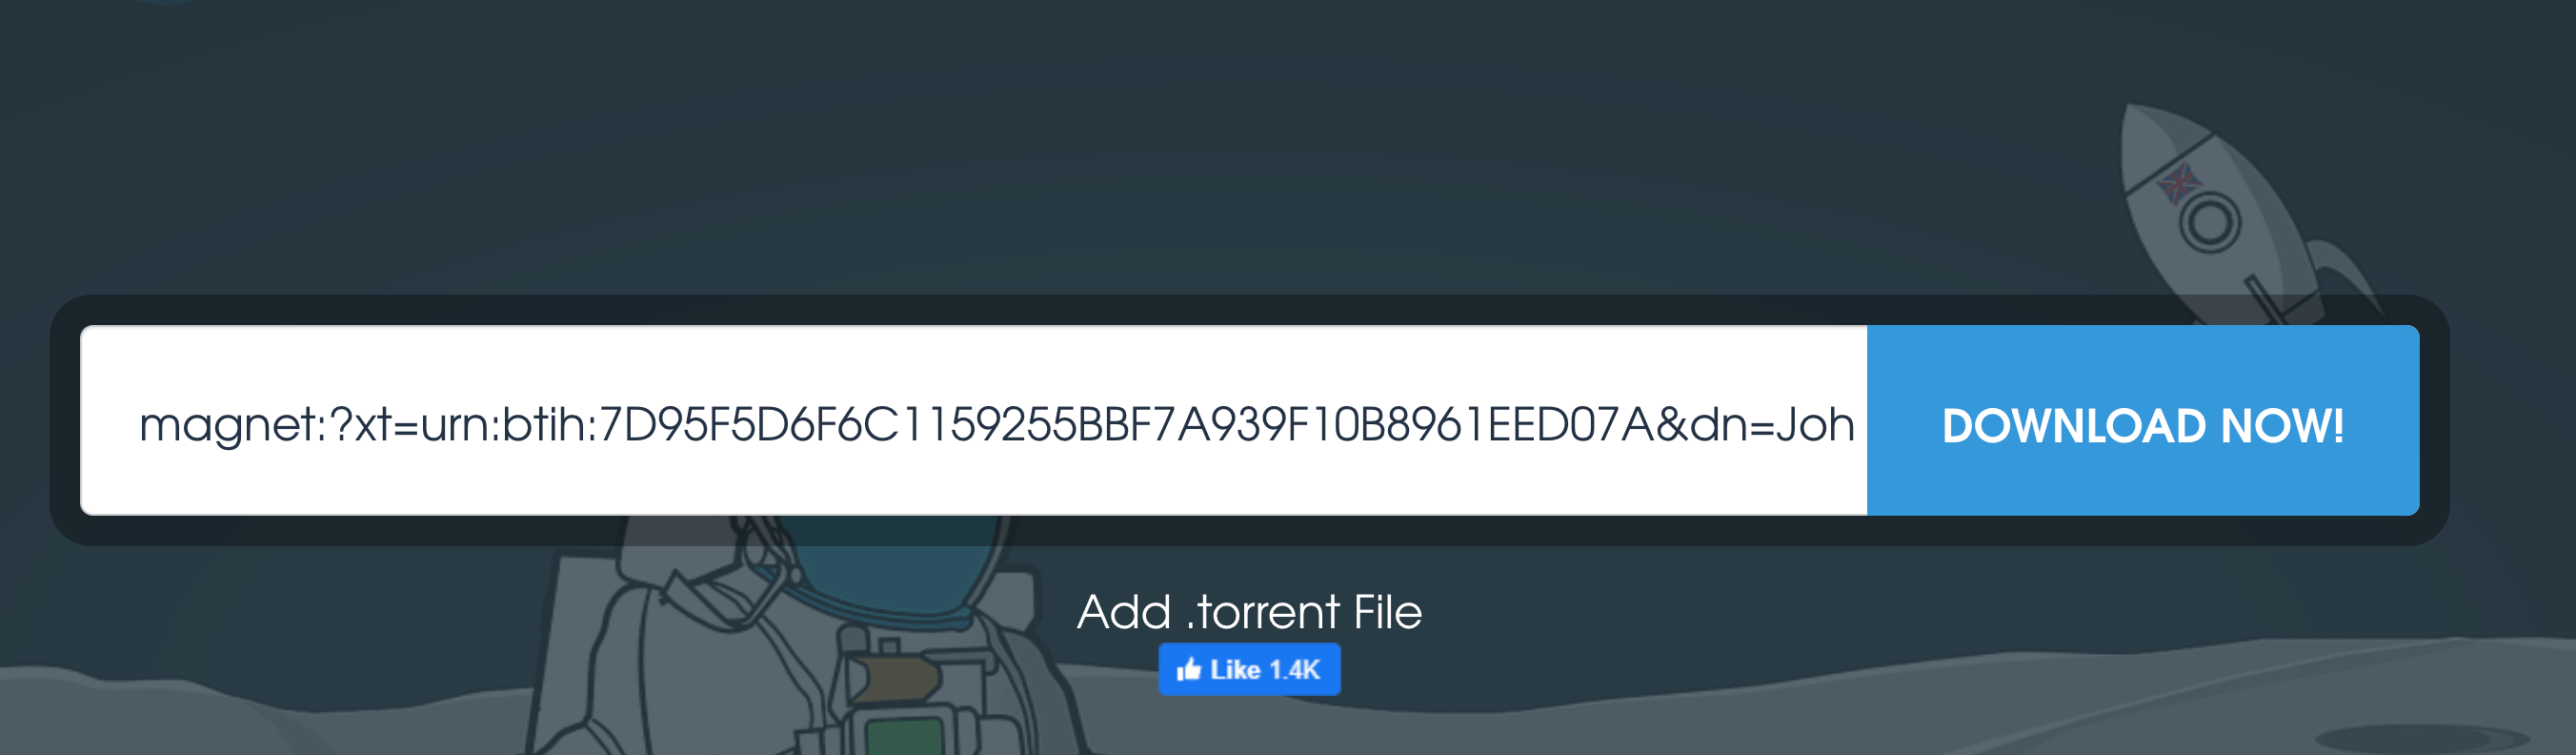 Torrent will start downloading the file